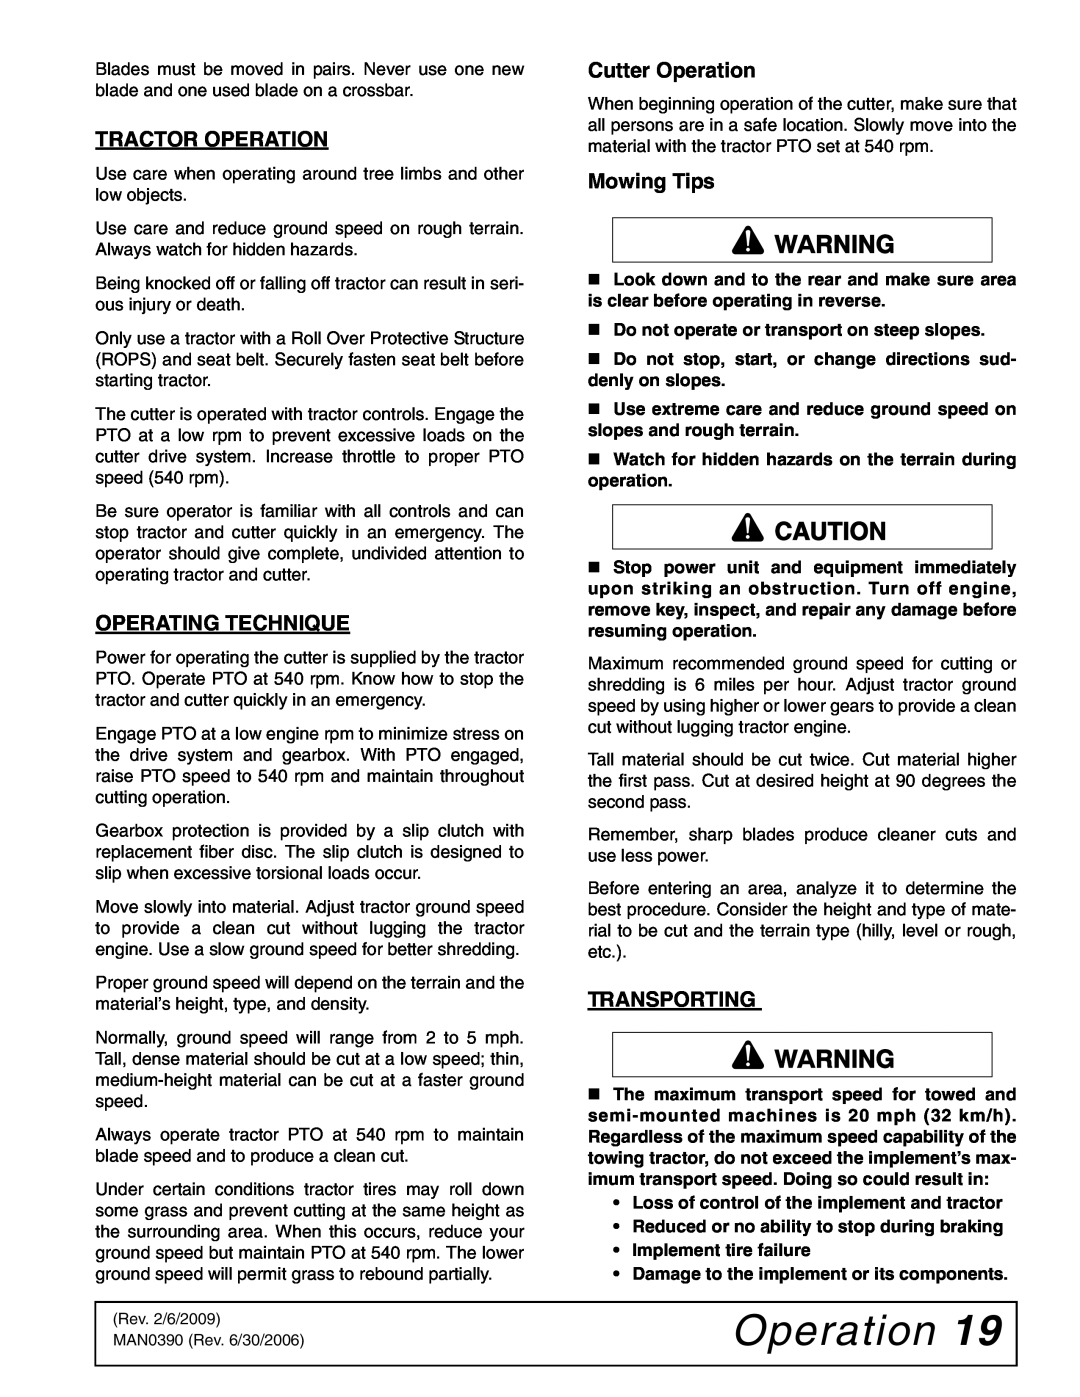 Woods Equipment DS120, DS96 manual Tractor Operation, Operating Technique, Cutter Operation, Mowing Tips, Transporting 